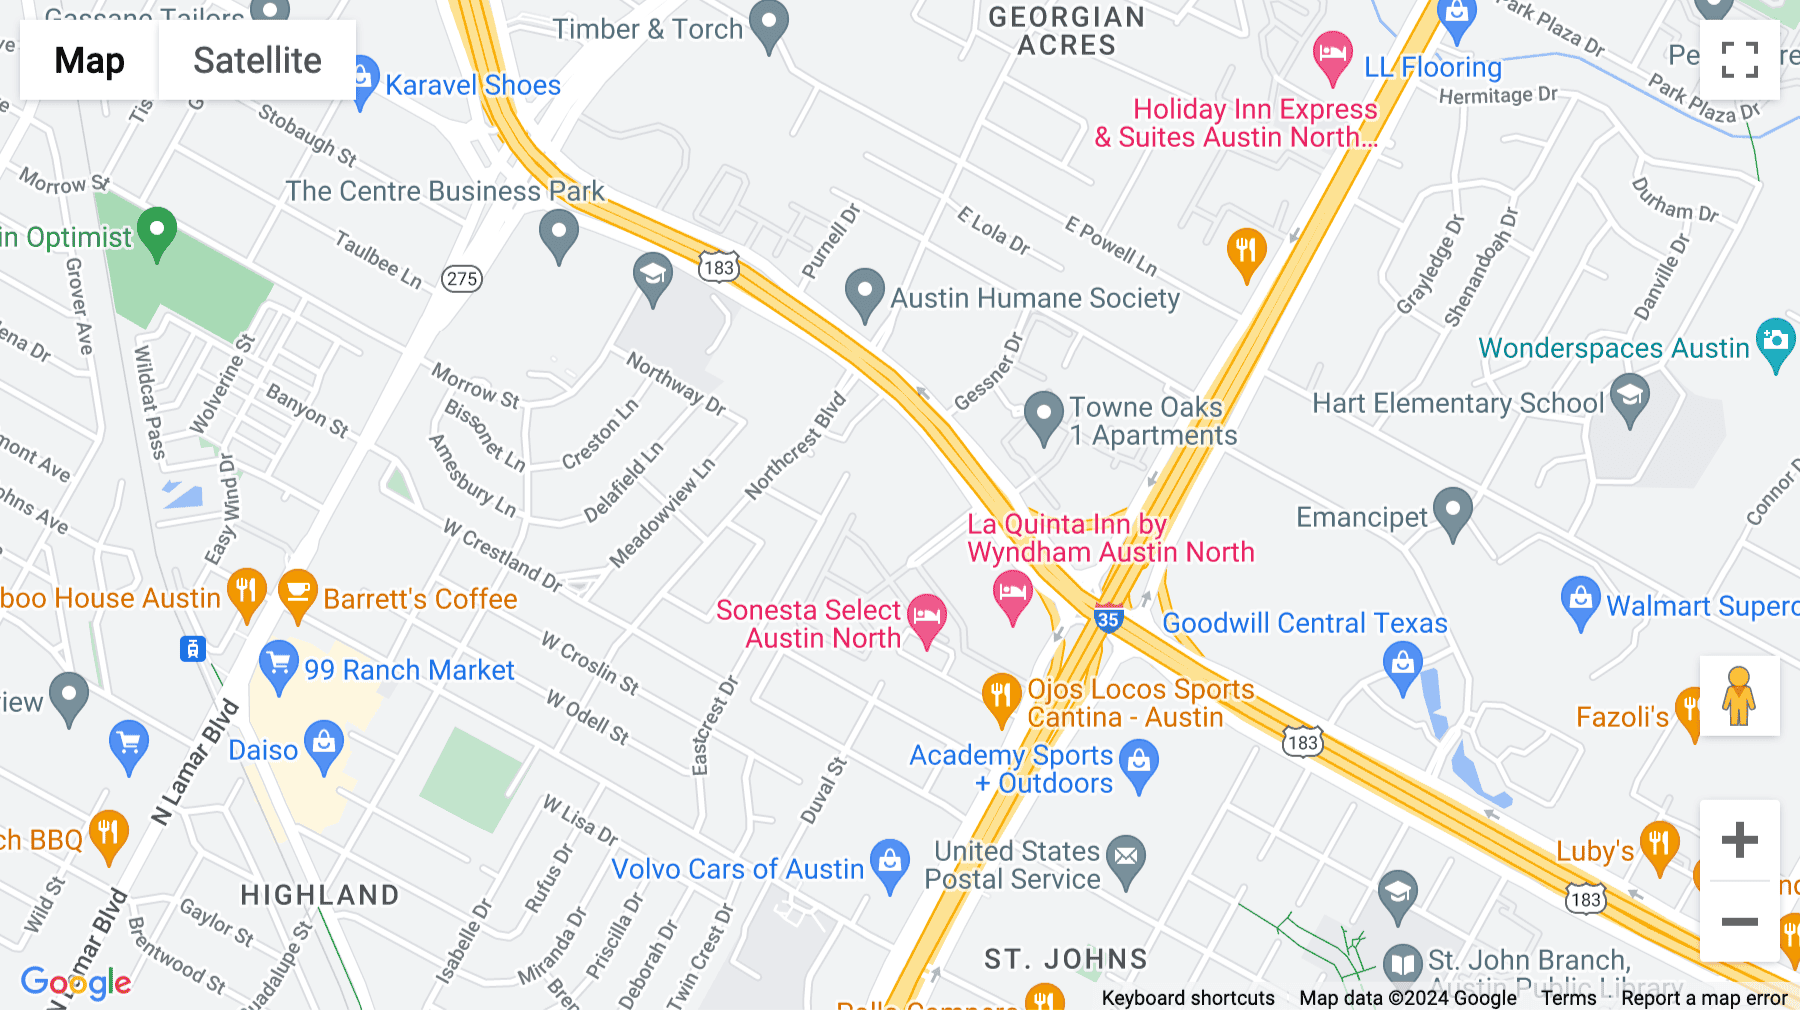 Click for interative map of 7600 Chevy Chase Drive, Suite 2300, Chase Park Centre, Austin